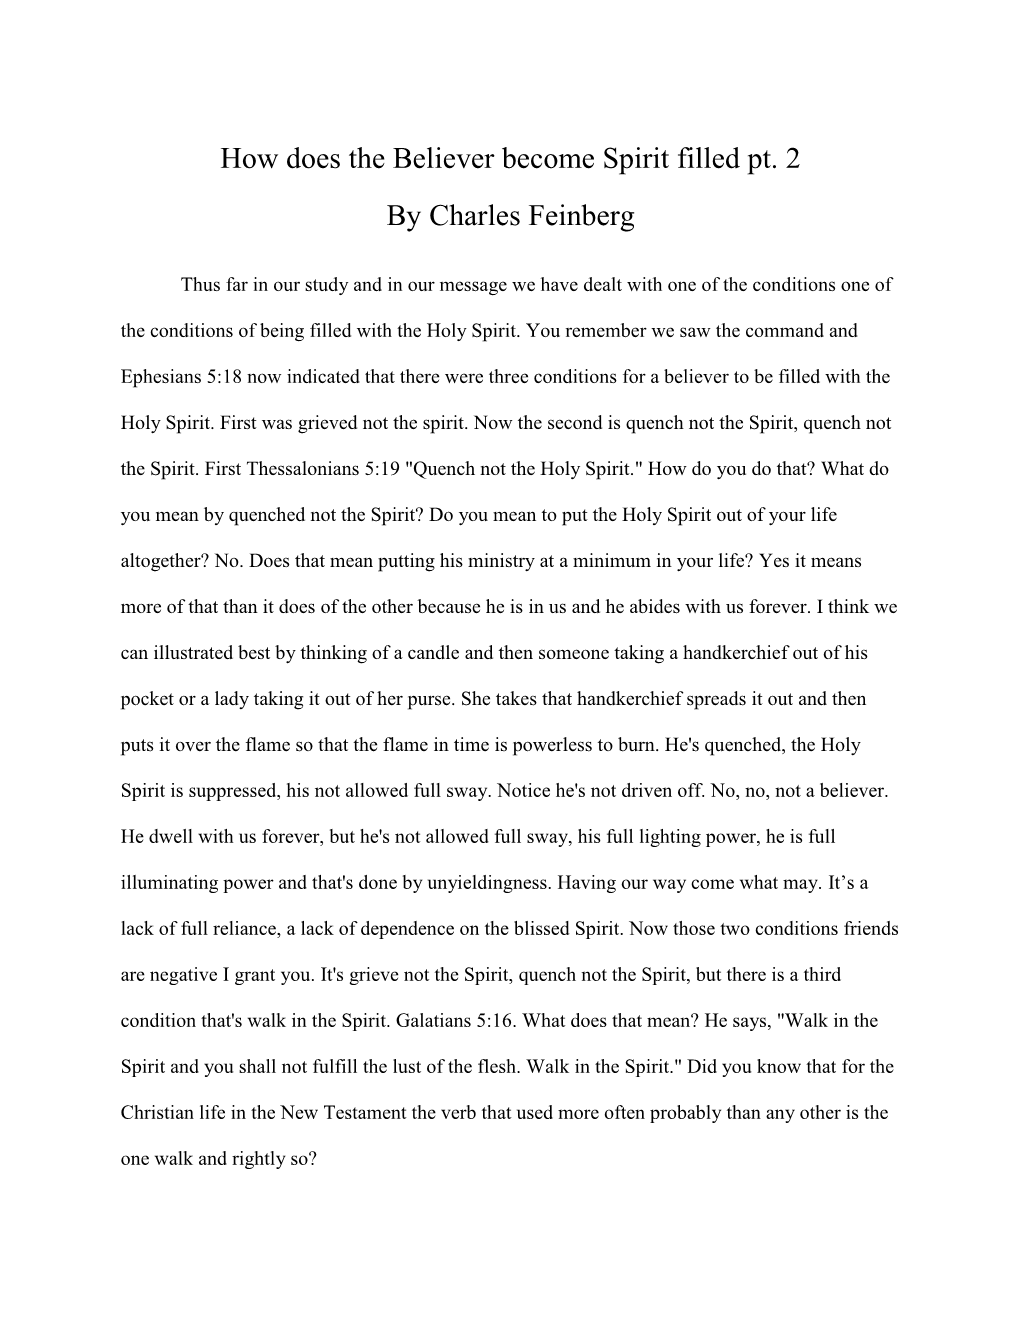 How Does the Believer Become Spirit Filled Pt 2.Pdf